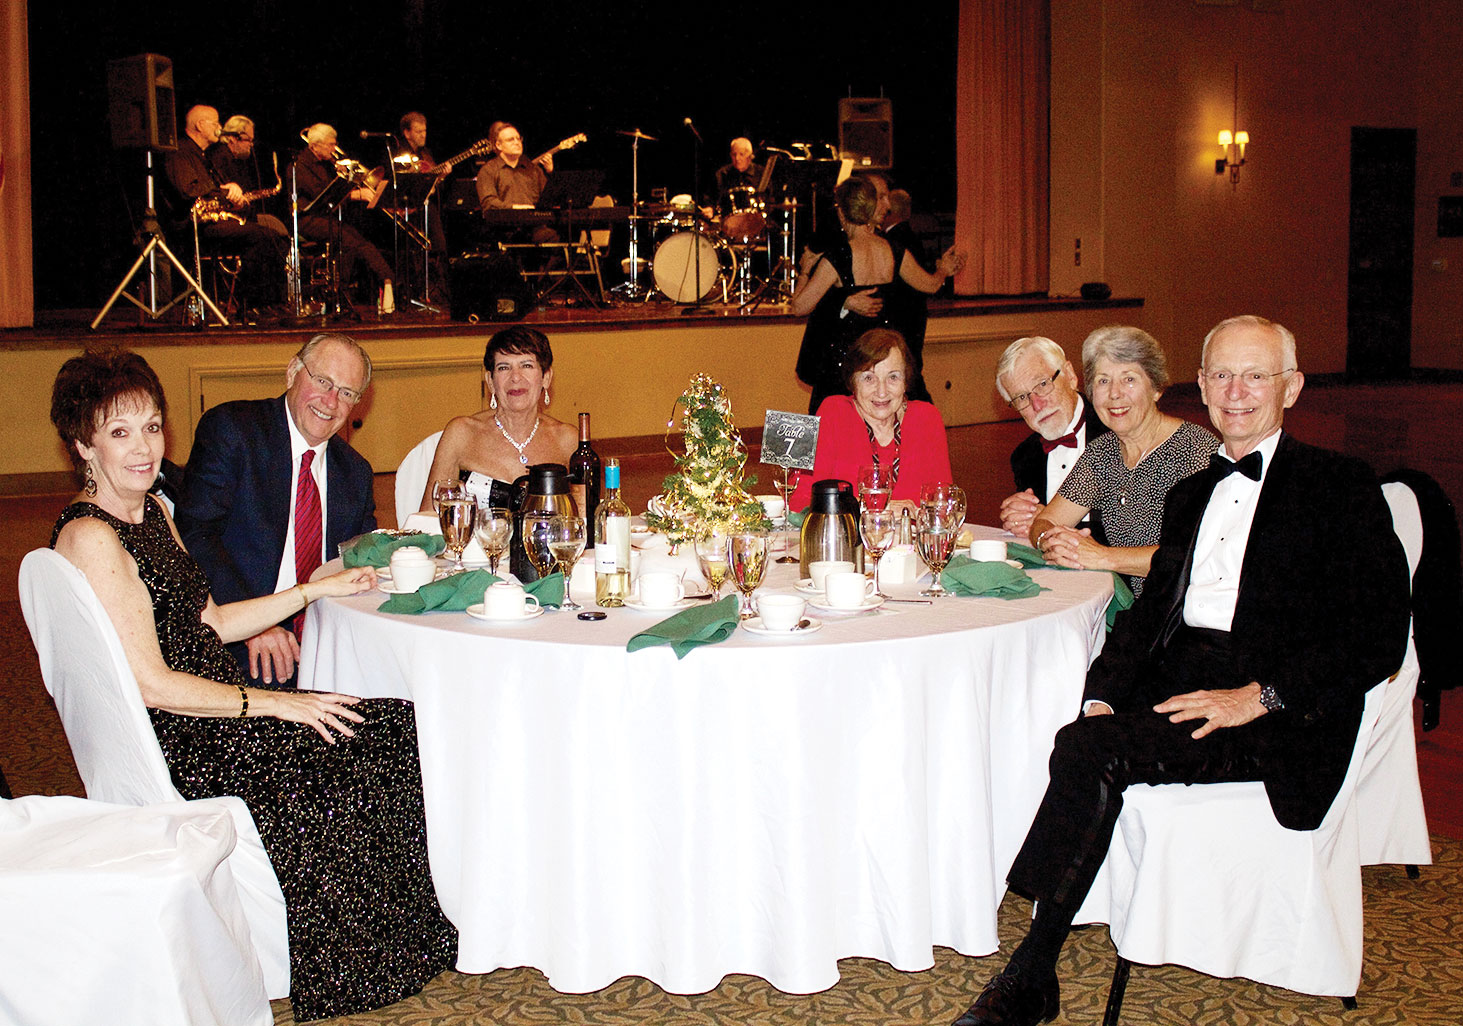 Enjoying the December dinner and dance are members Dodie Prescott, Len and Jana Eaton and Liz and Ken Eden with guests Claire and Orville Smith.